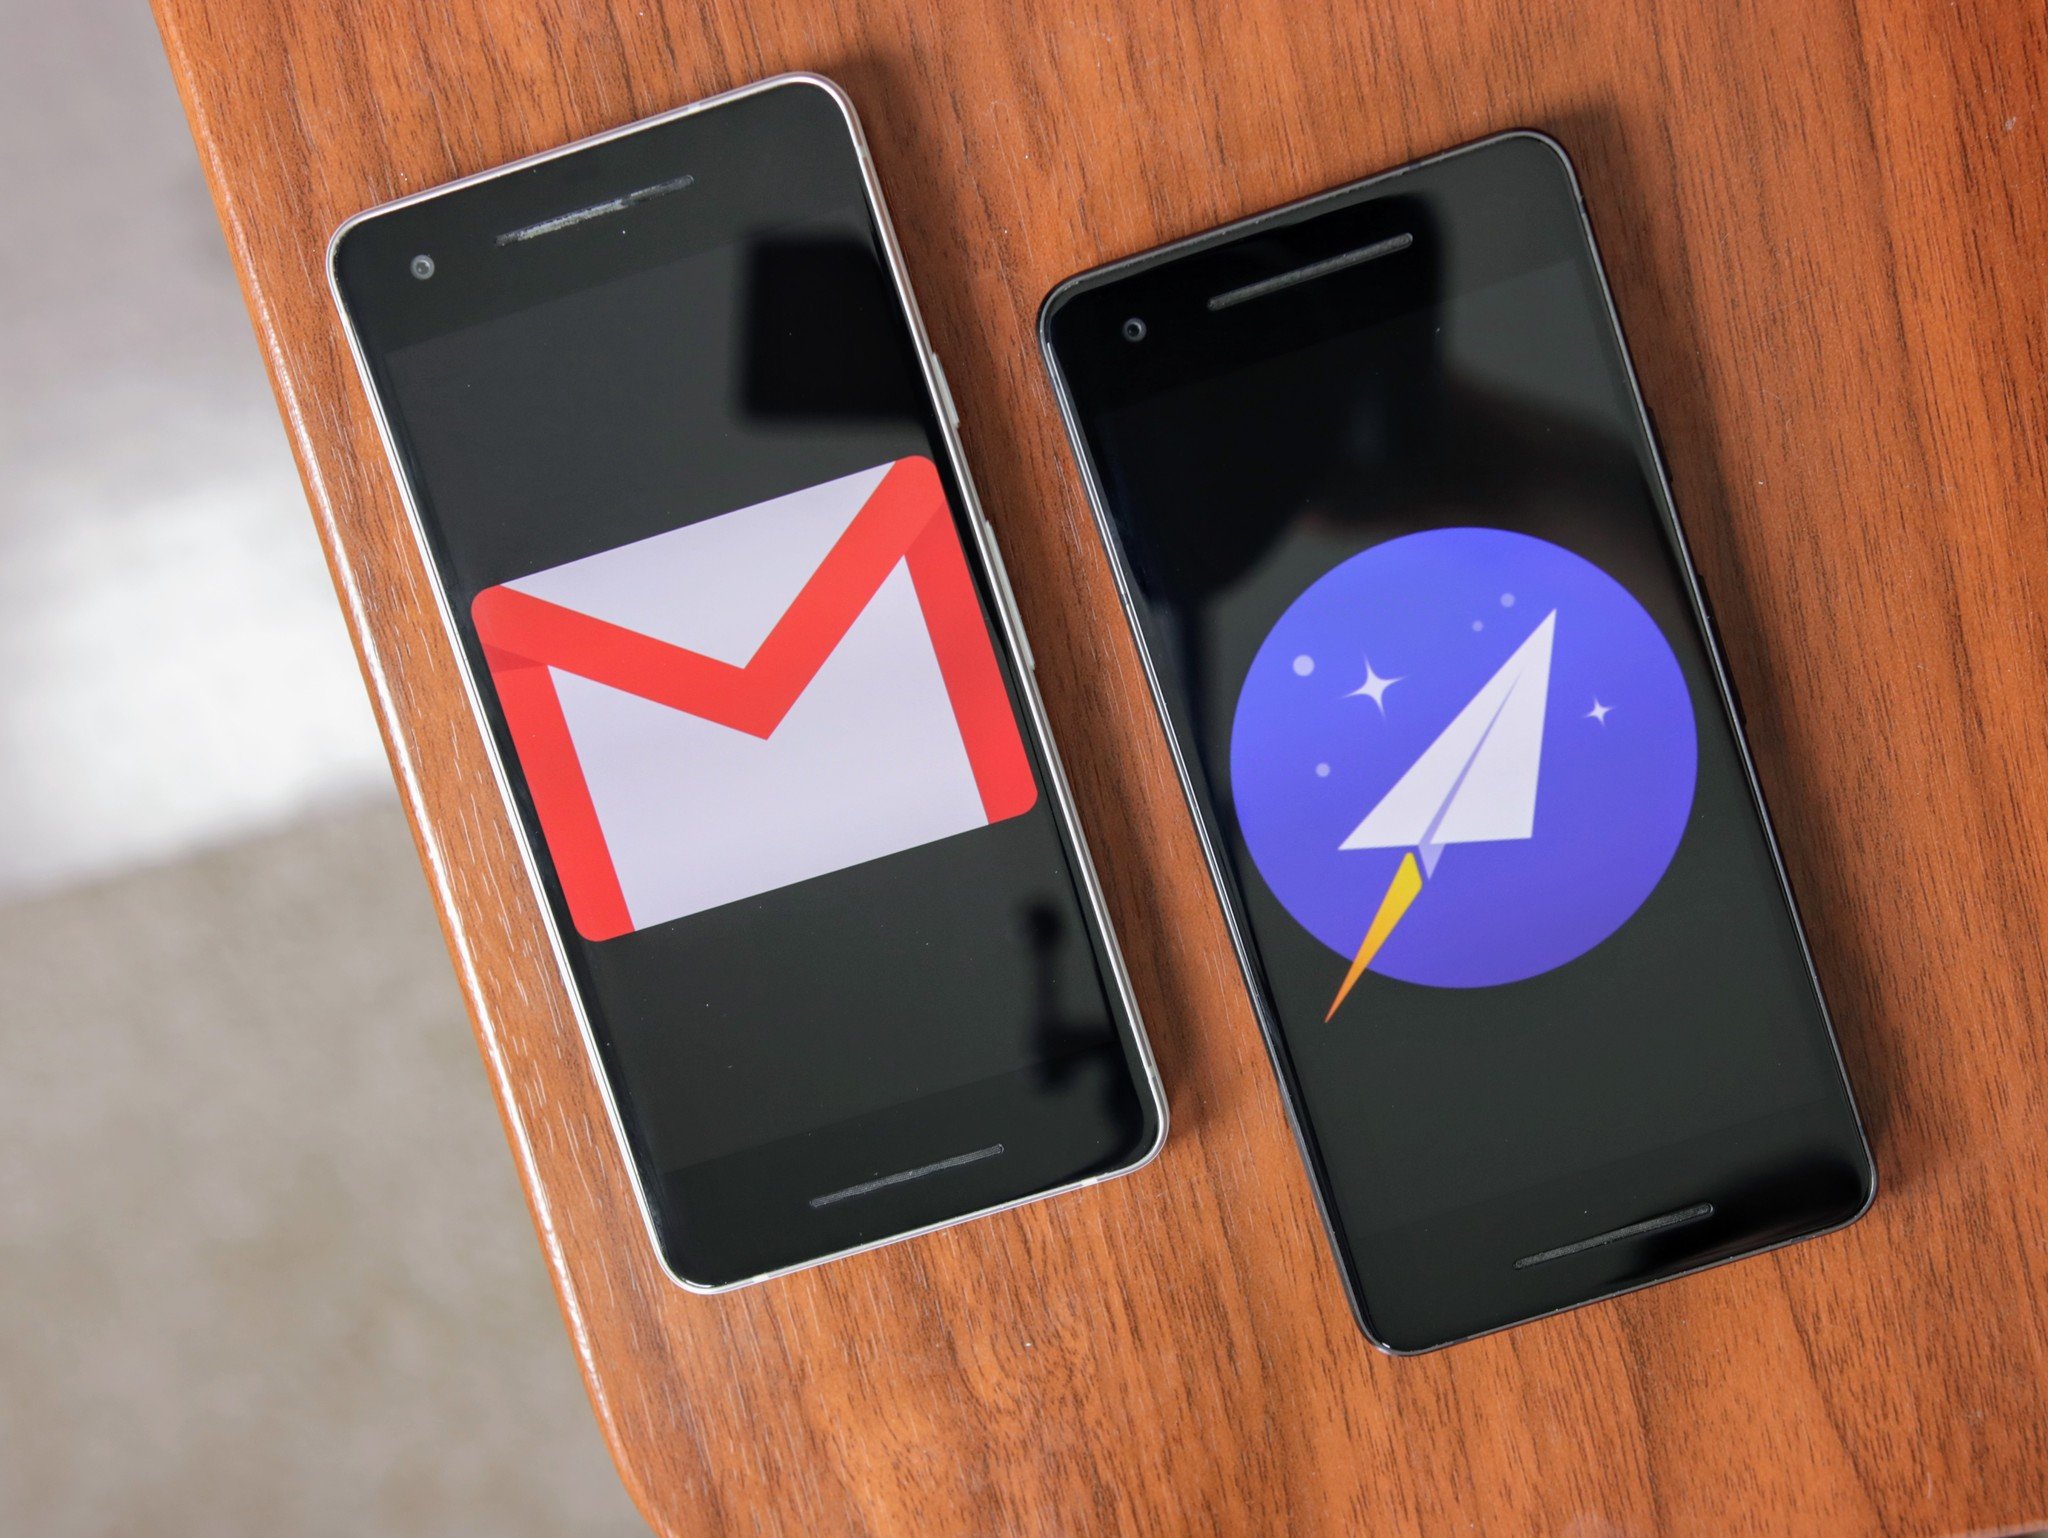 Newton Mail and Gmail logos